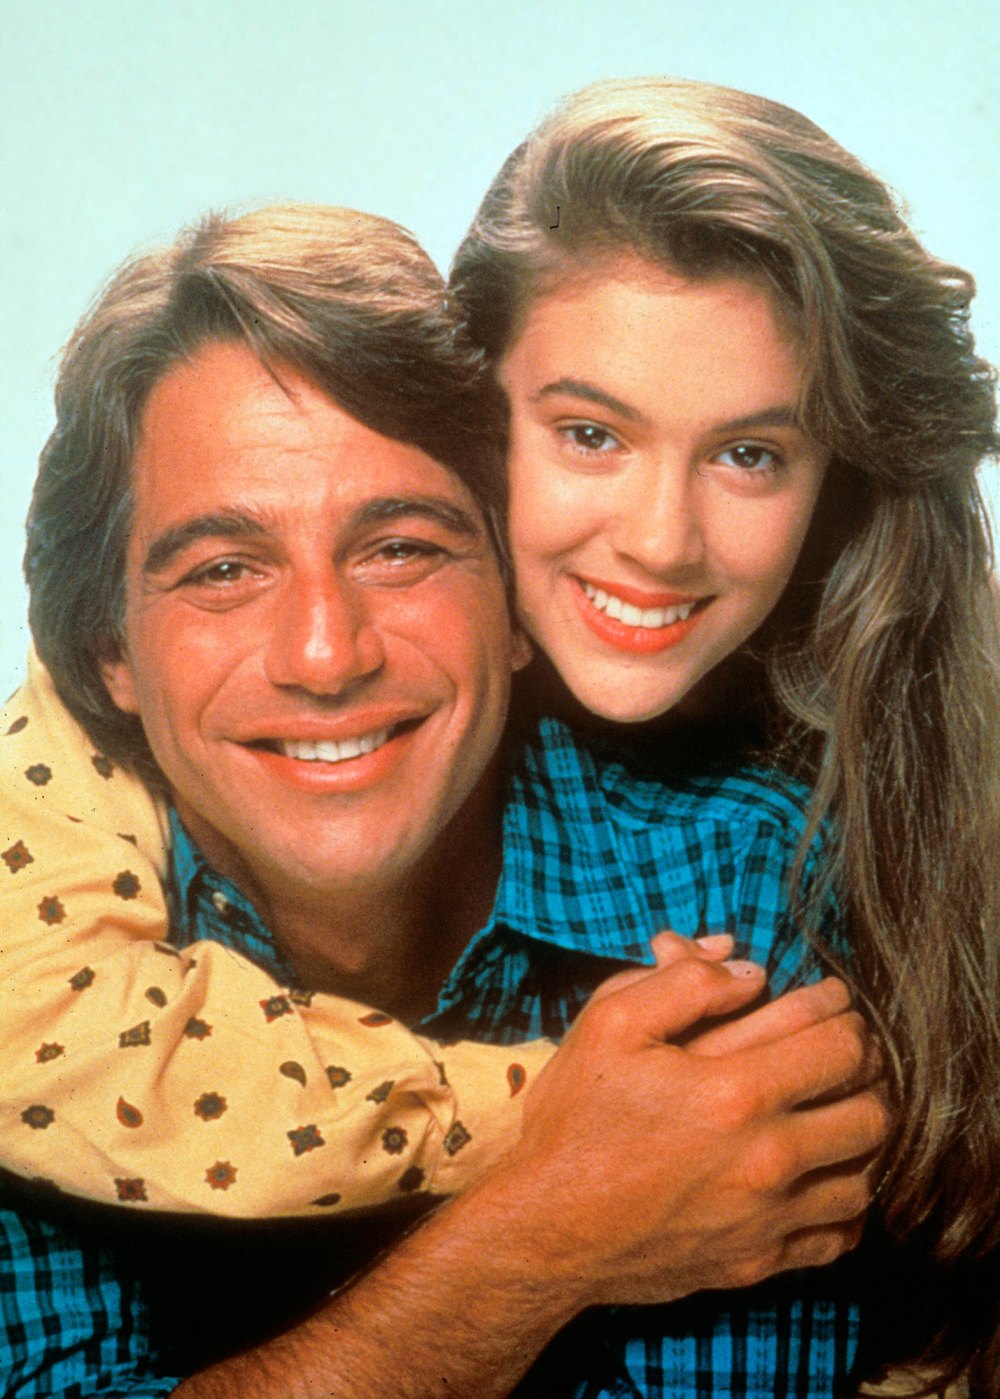 Alyssa Milano takes her son to see 'TV Dad' Tony Danza: 'Tonight was very special for me'